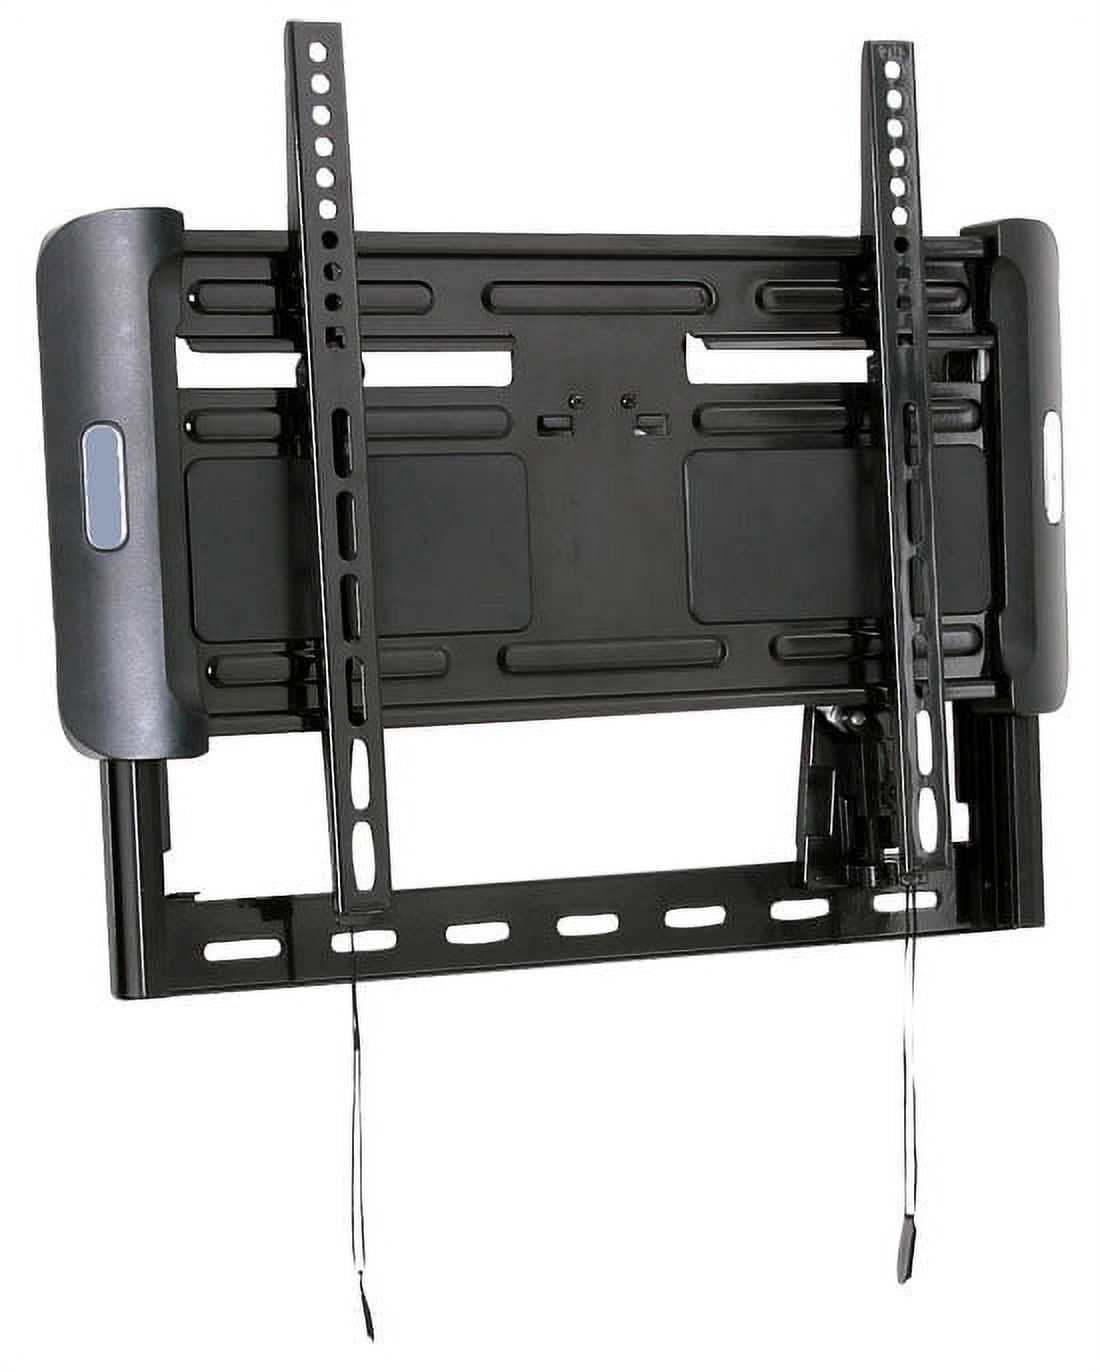 PYLE PSW681MF1 - Universal TV Mount - fits virtually any 32'' to 47'' TVs including the latest Plasma, LED, LCD, 3D, Smart & other flat panel TVs - image 2 of 3